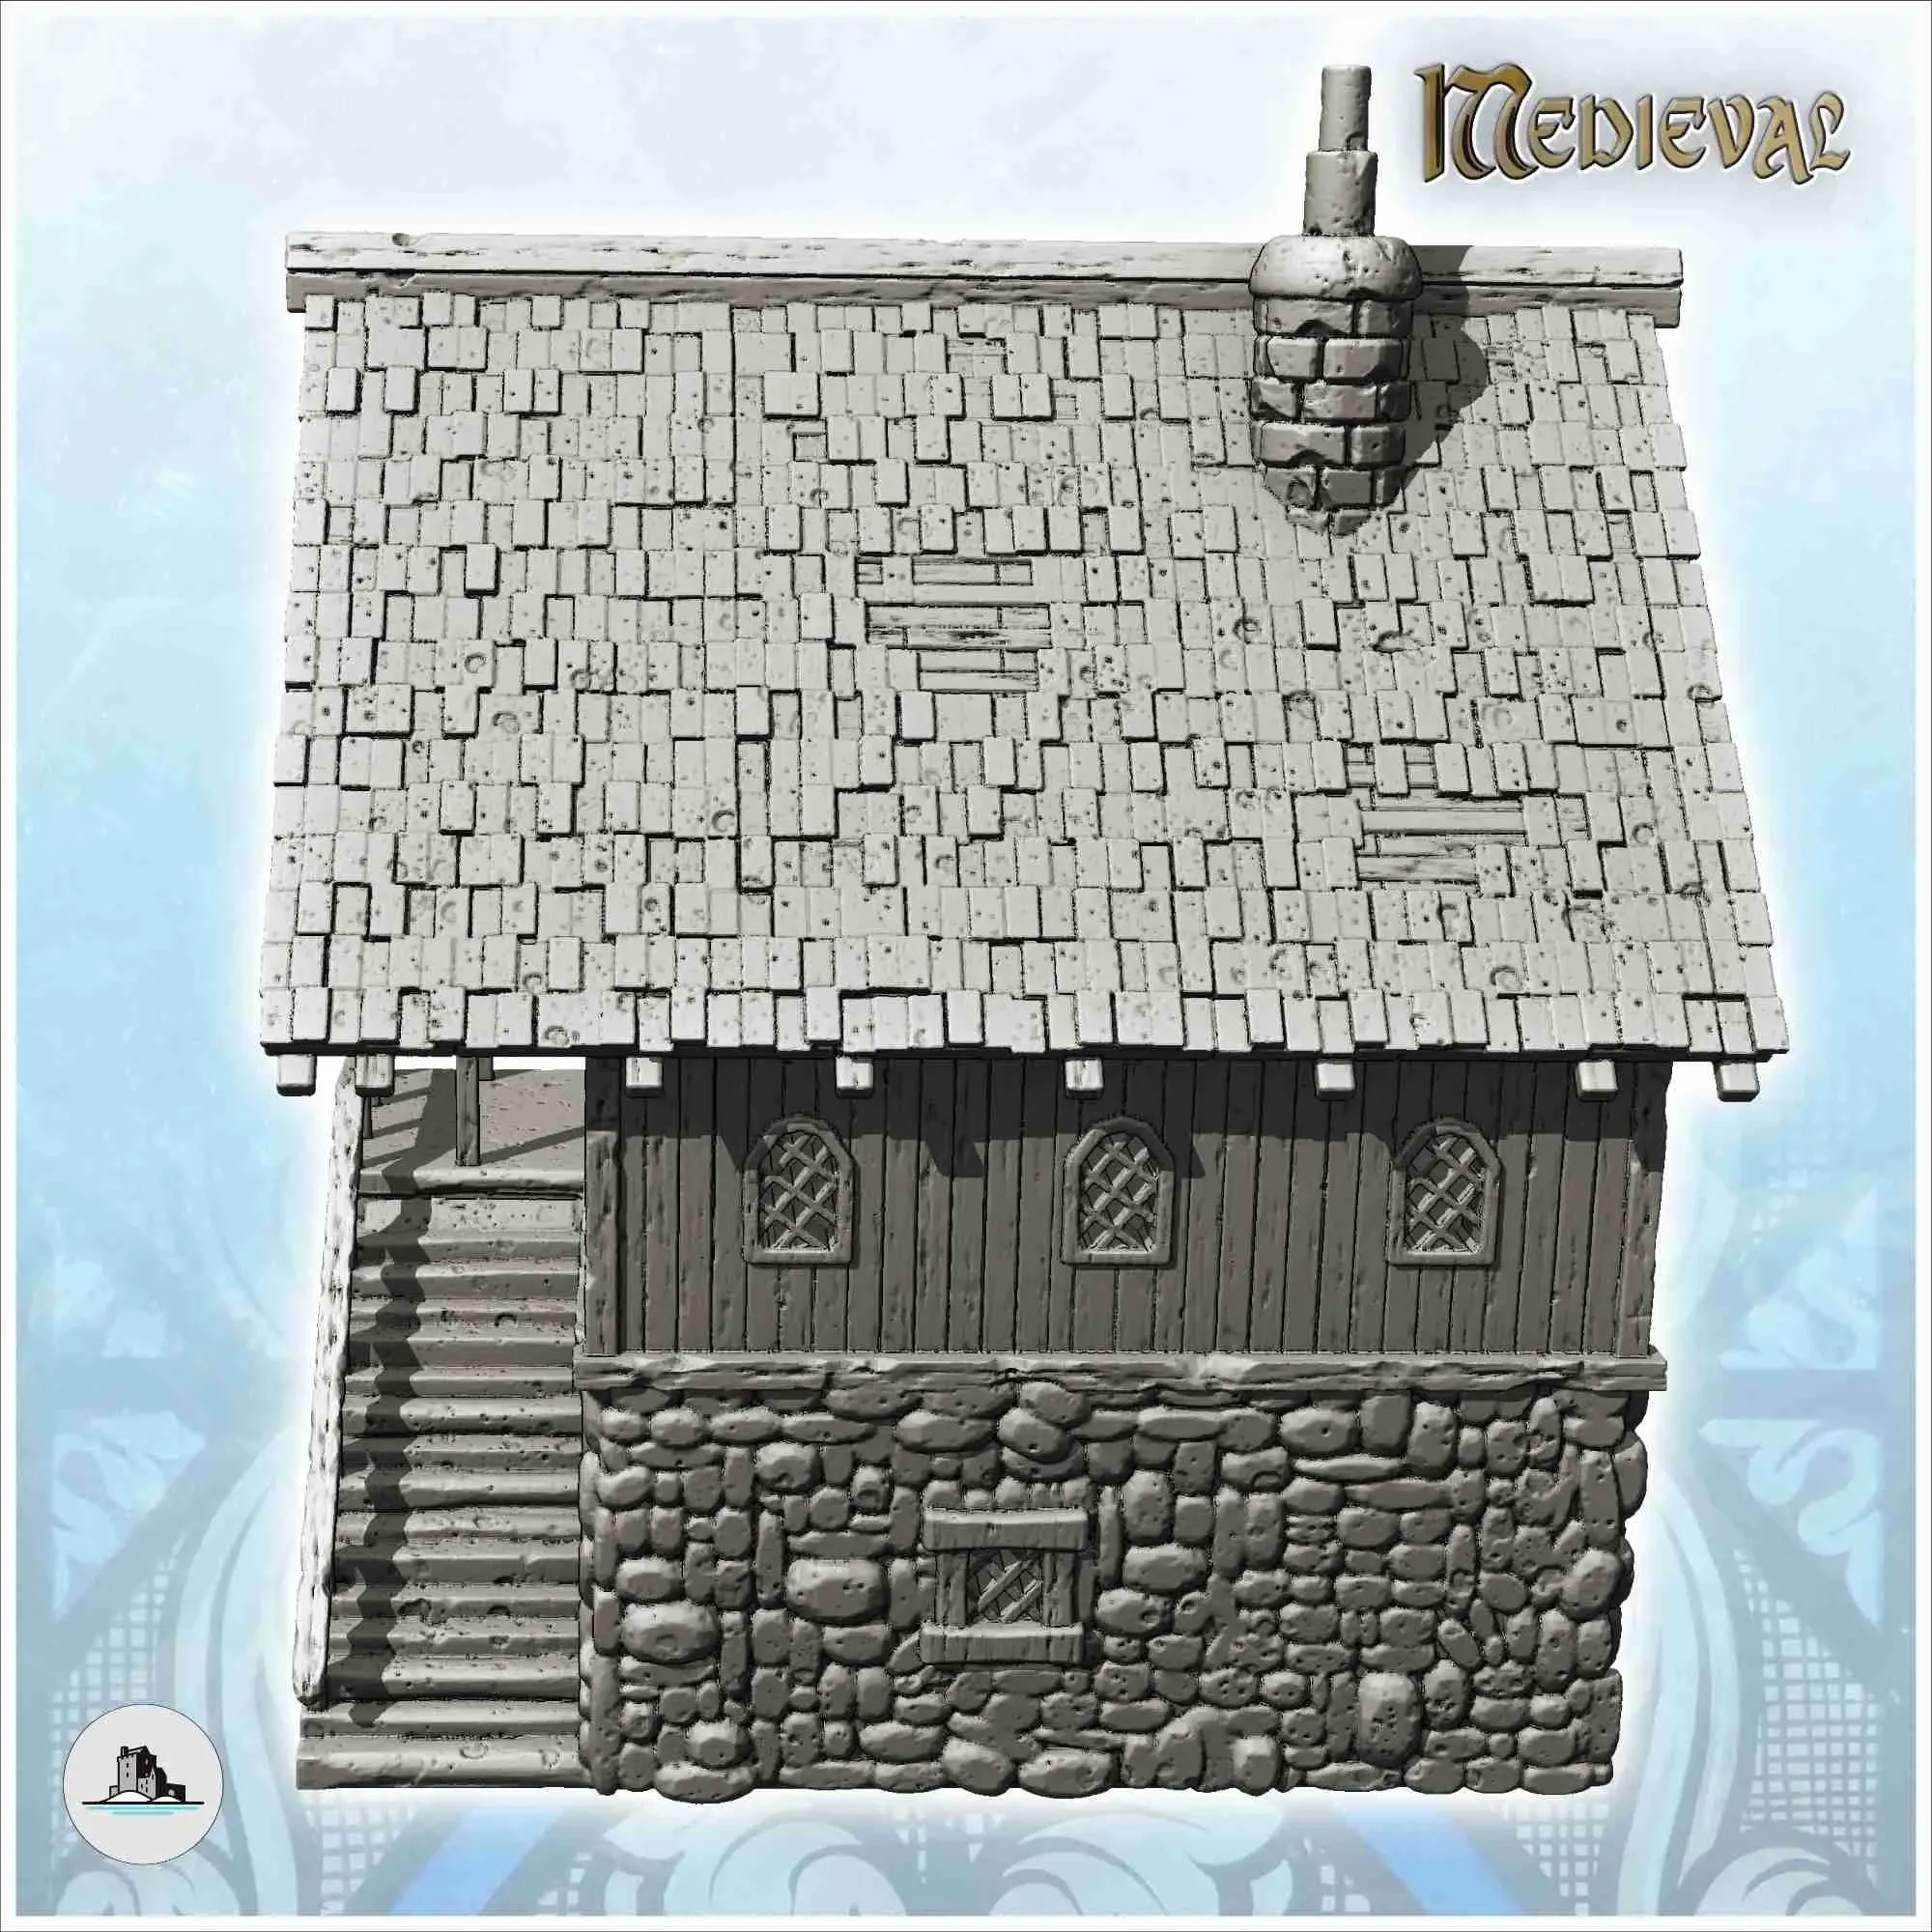 Medieval tavern with large entrance staircase and tiled roof